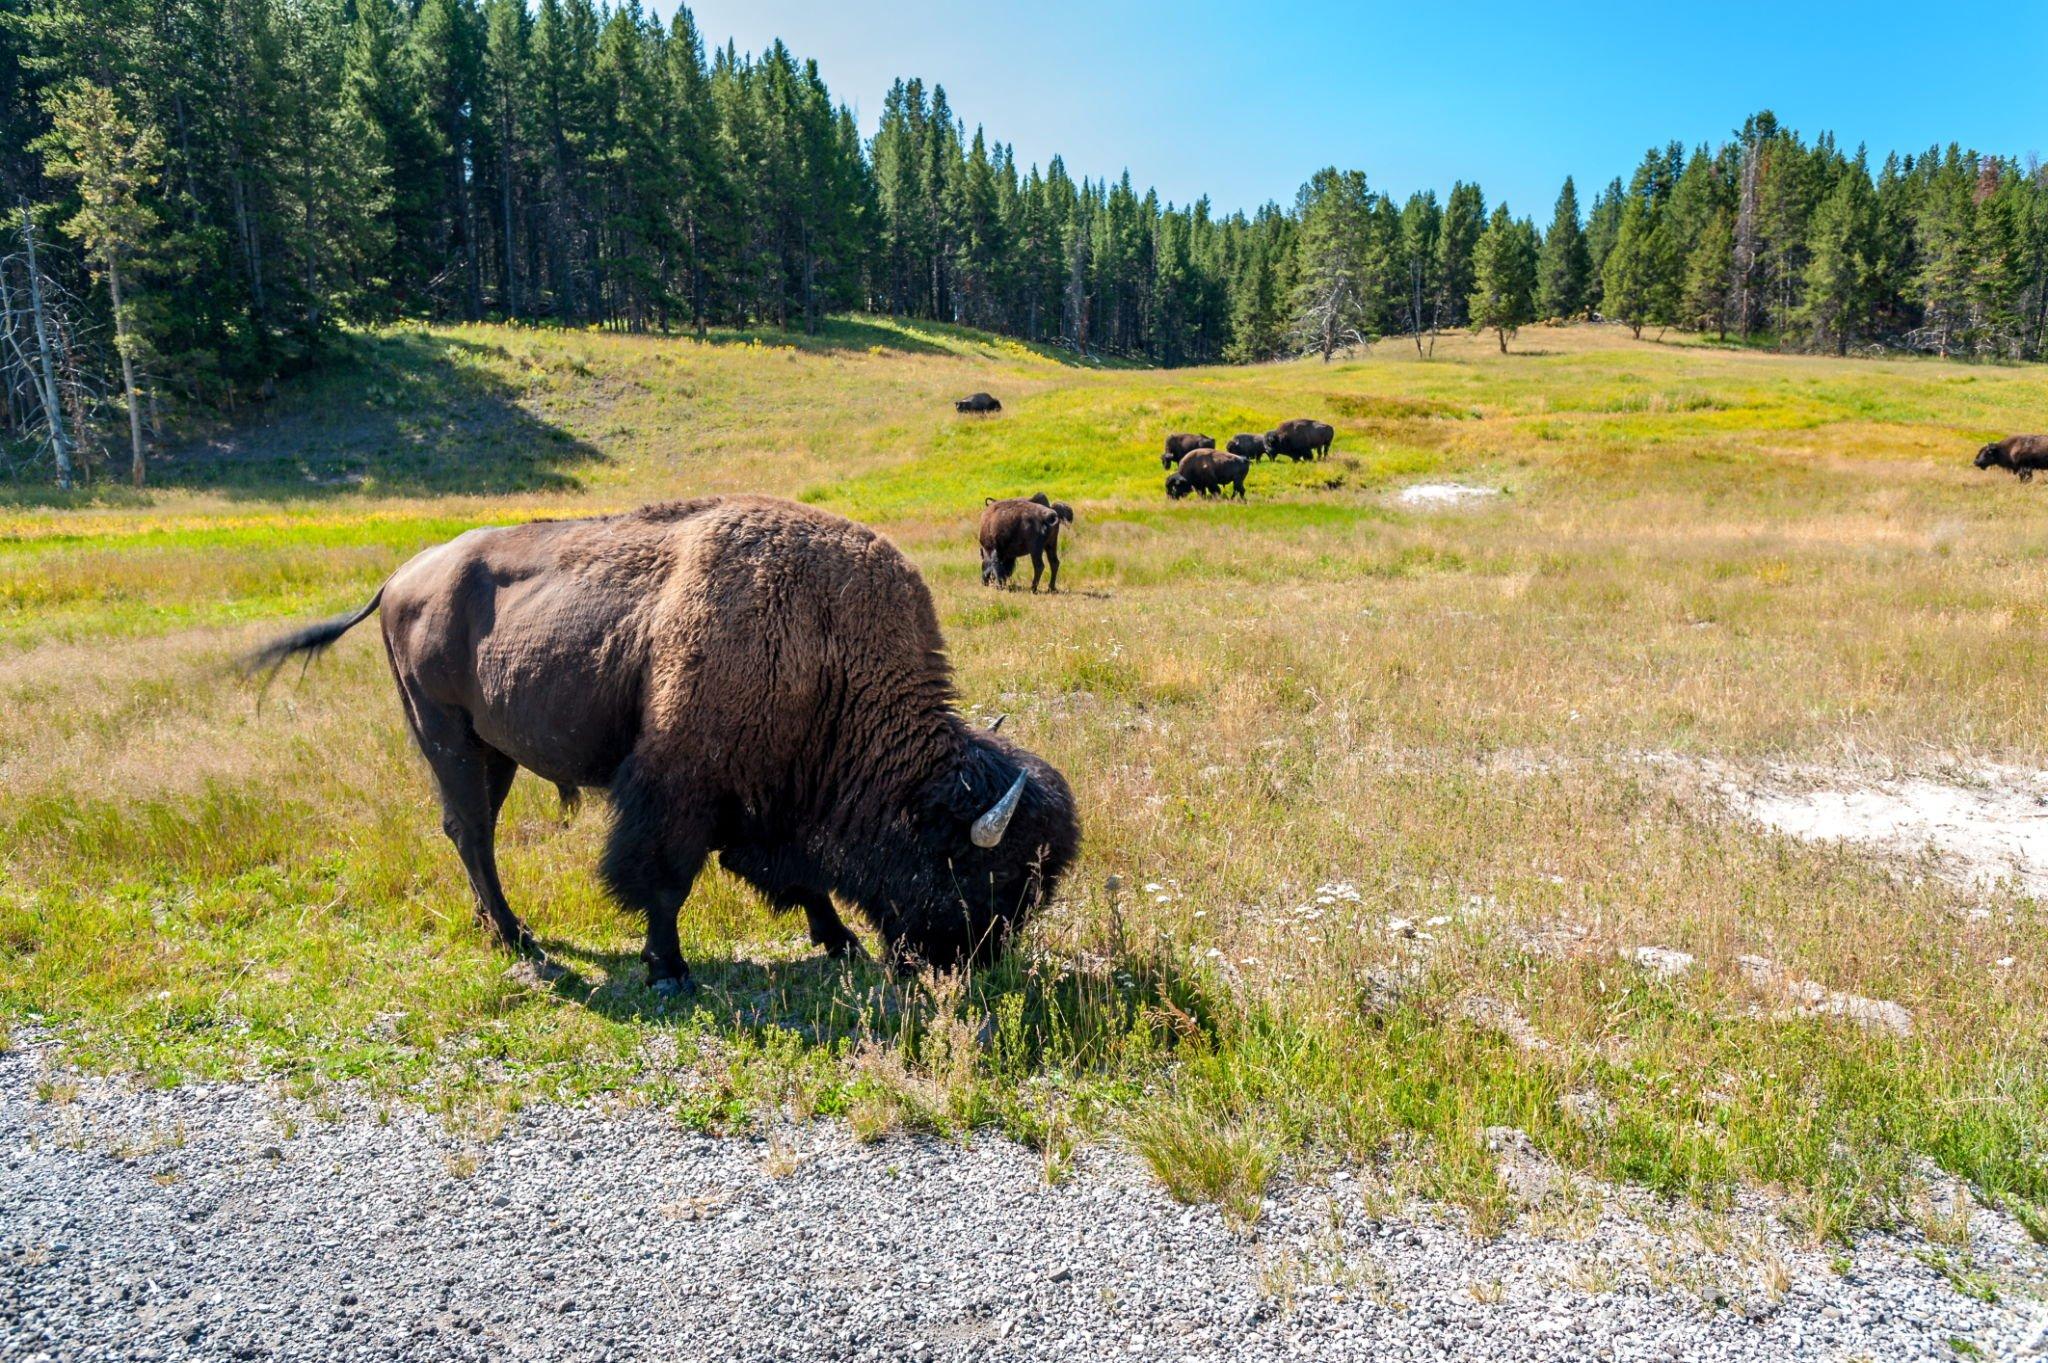 The Fascinating Bison Story